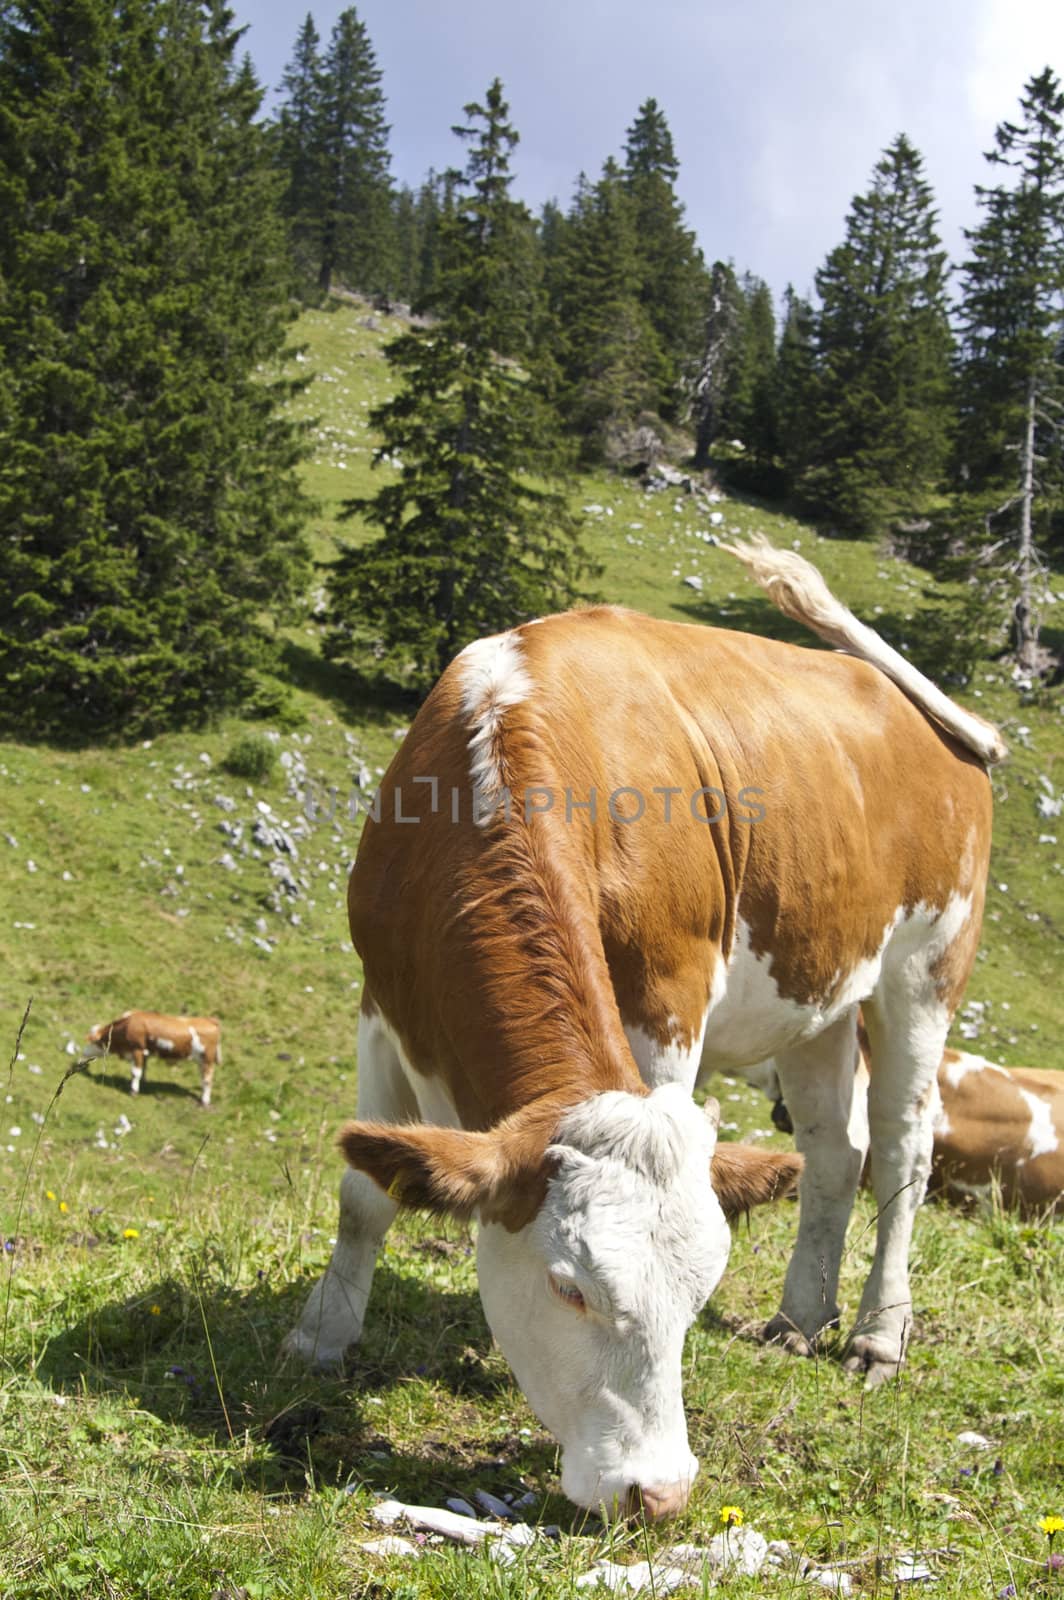 Large brown cow eating grass in a pasture in the mountains